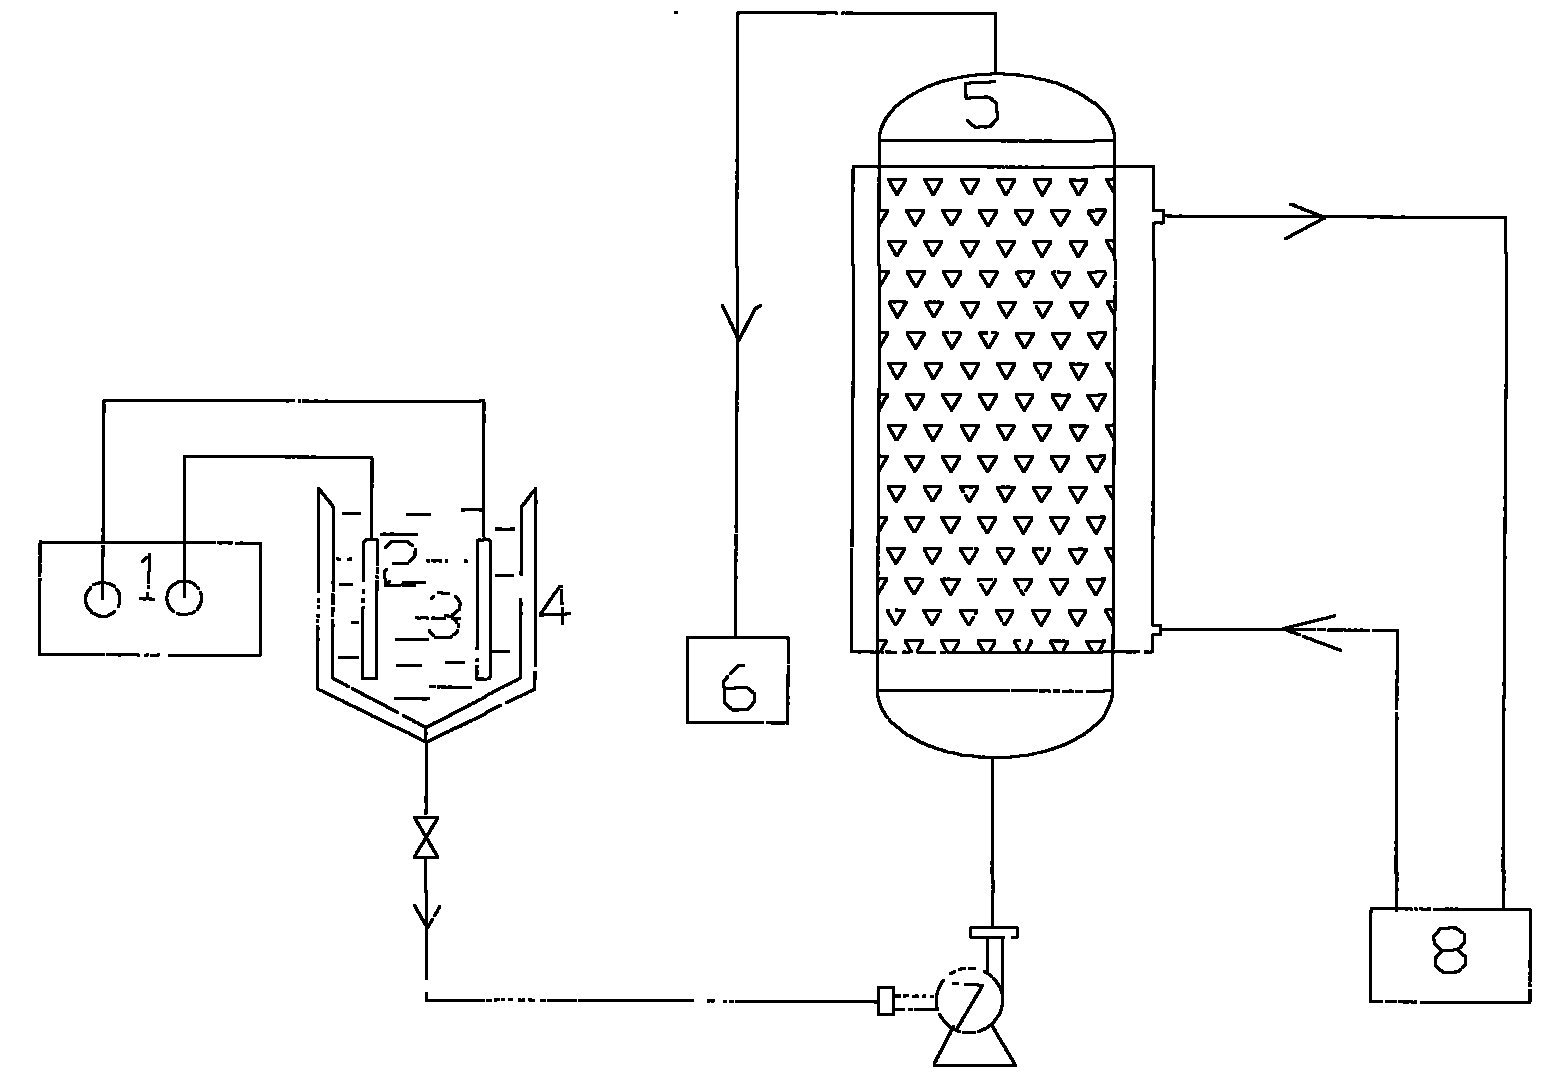 Method for electrolysis-catalytic oxidation joint treatment on salt-containing organic wastewater